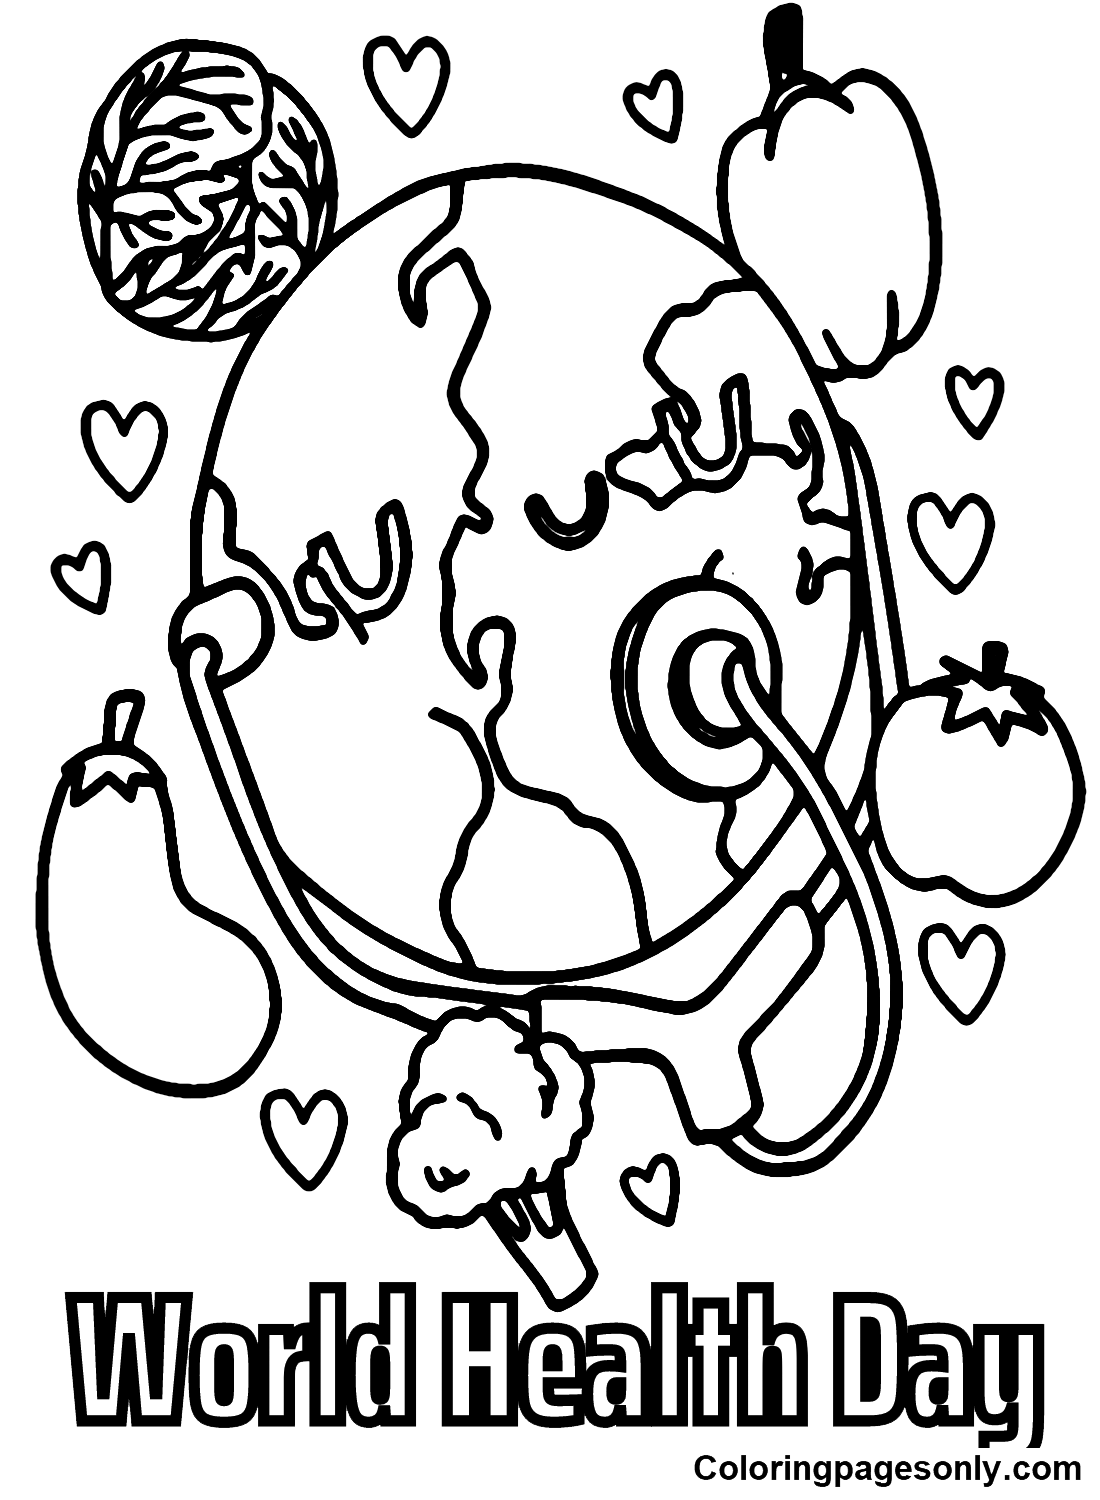 World Health Day for Kids Coloring Pages